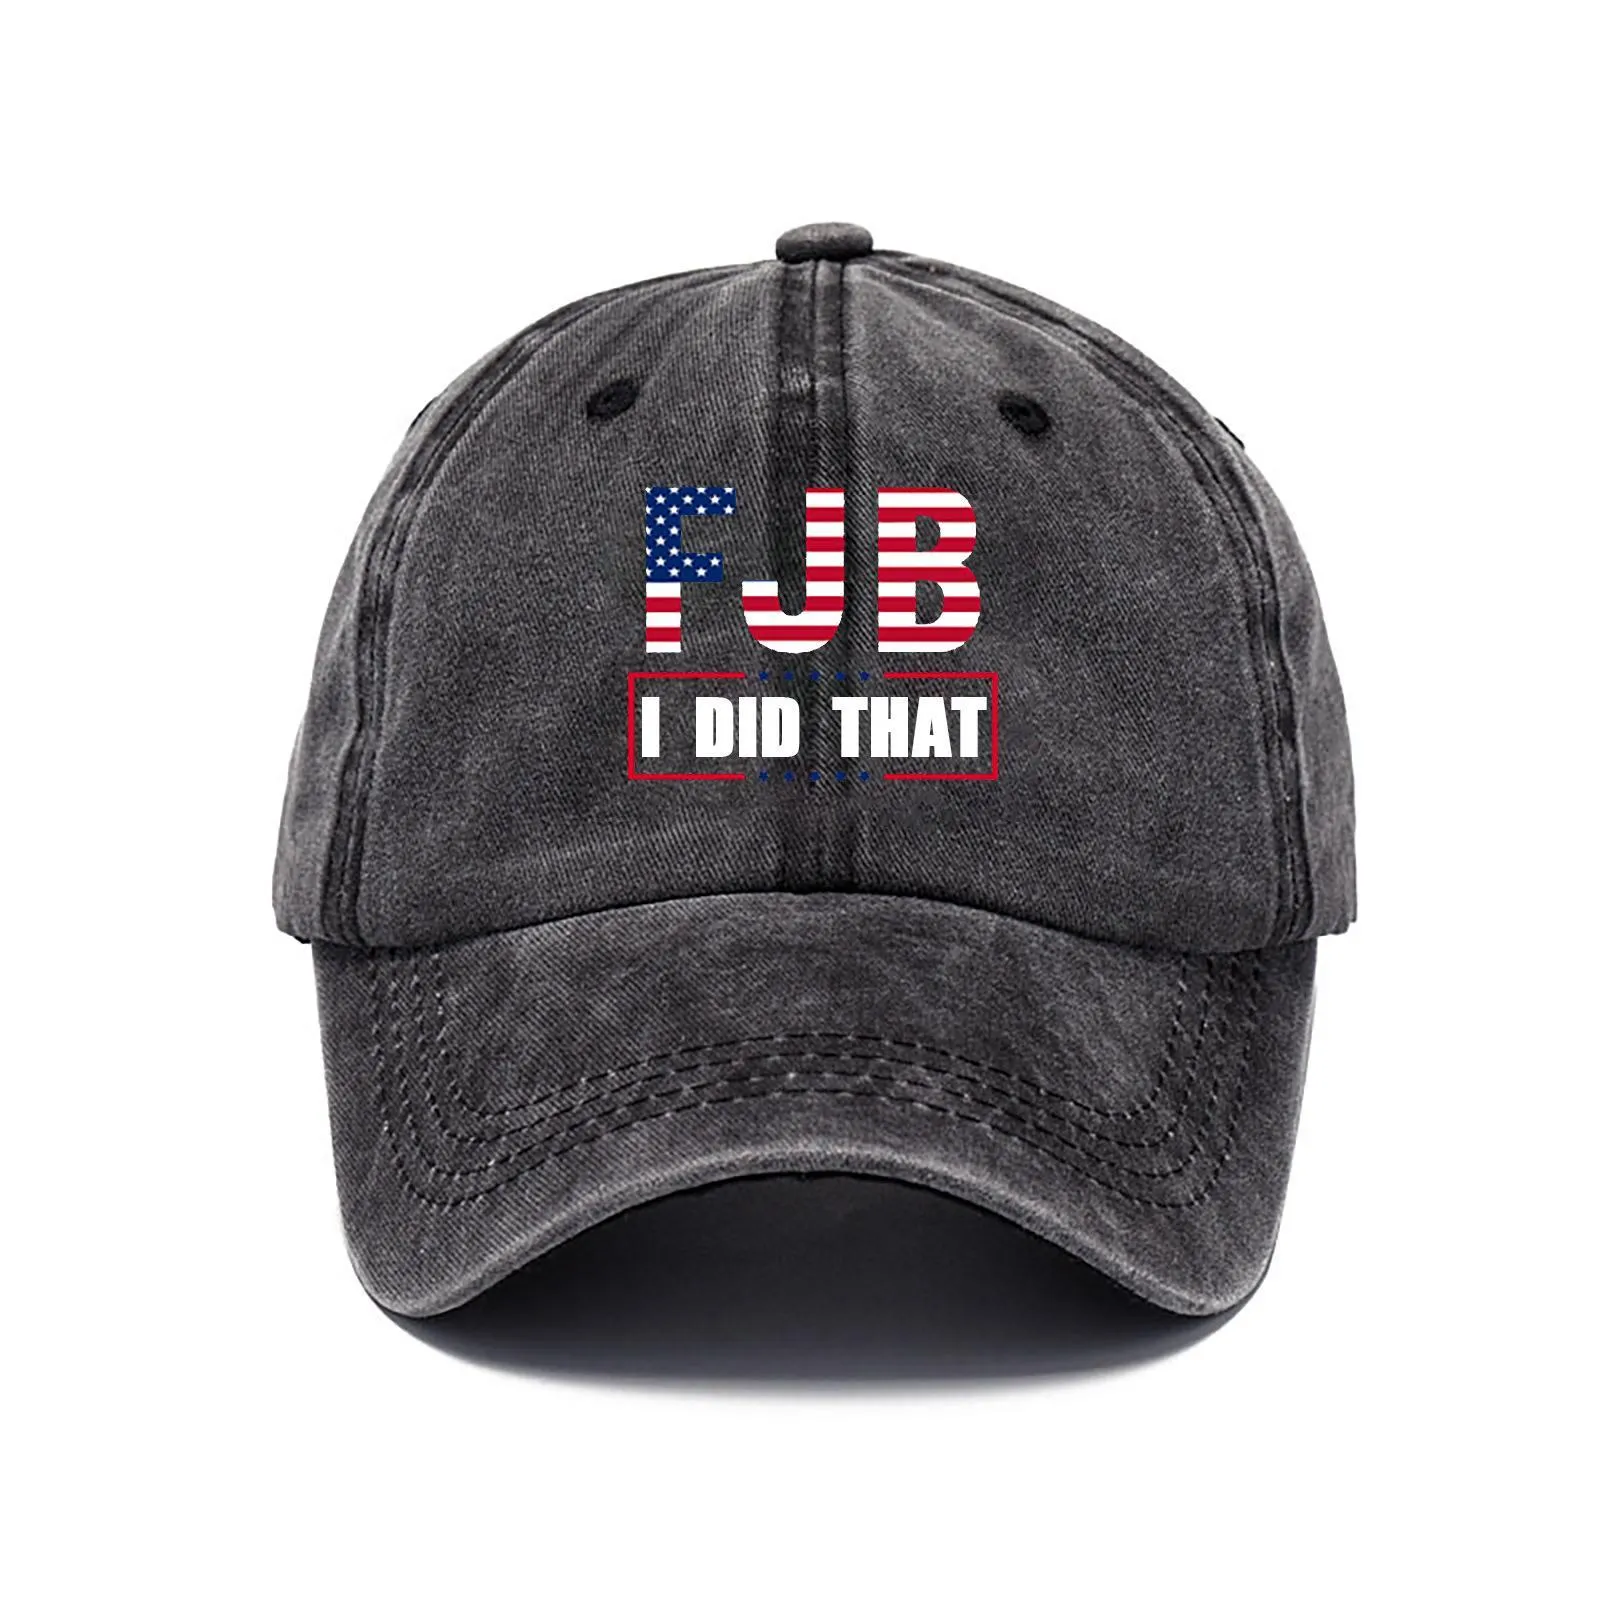 I DID THAT Printed Washed Baseball Cap Party Hats Dome Sun Cotton Hat With Adjustable Strap